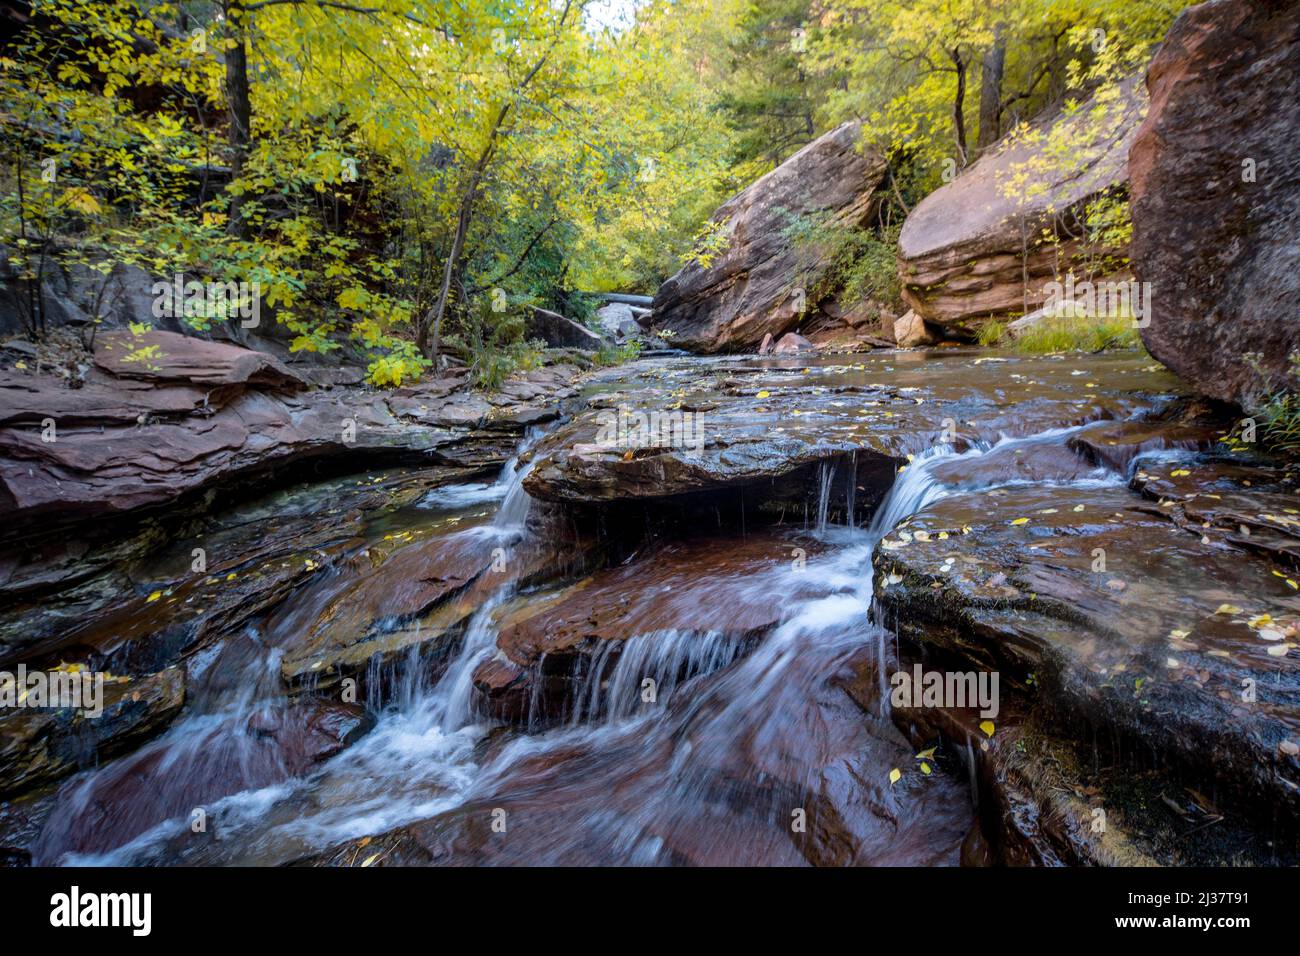 Fall colors have arrived at Zion National Parkâ.s North Creek. Stock Photo